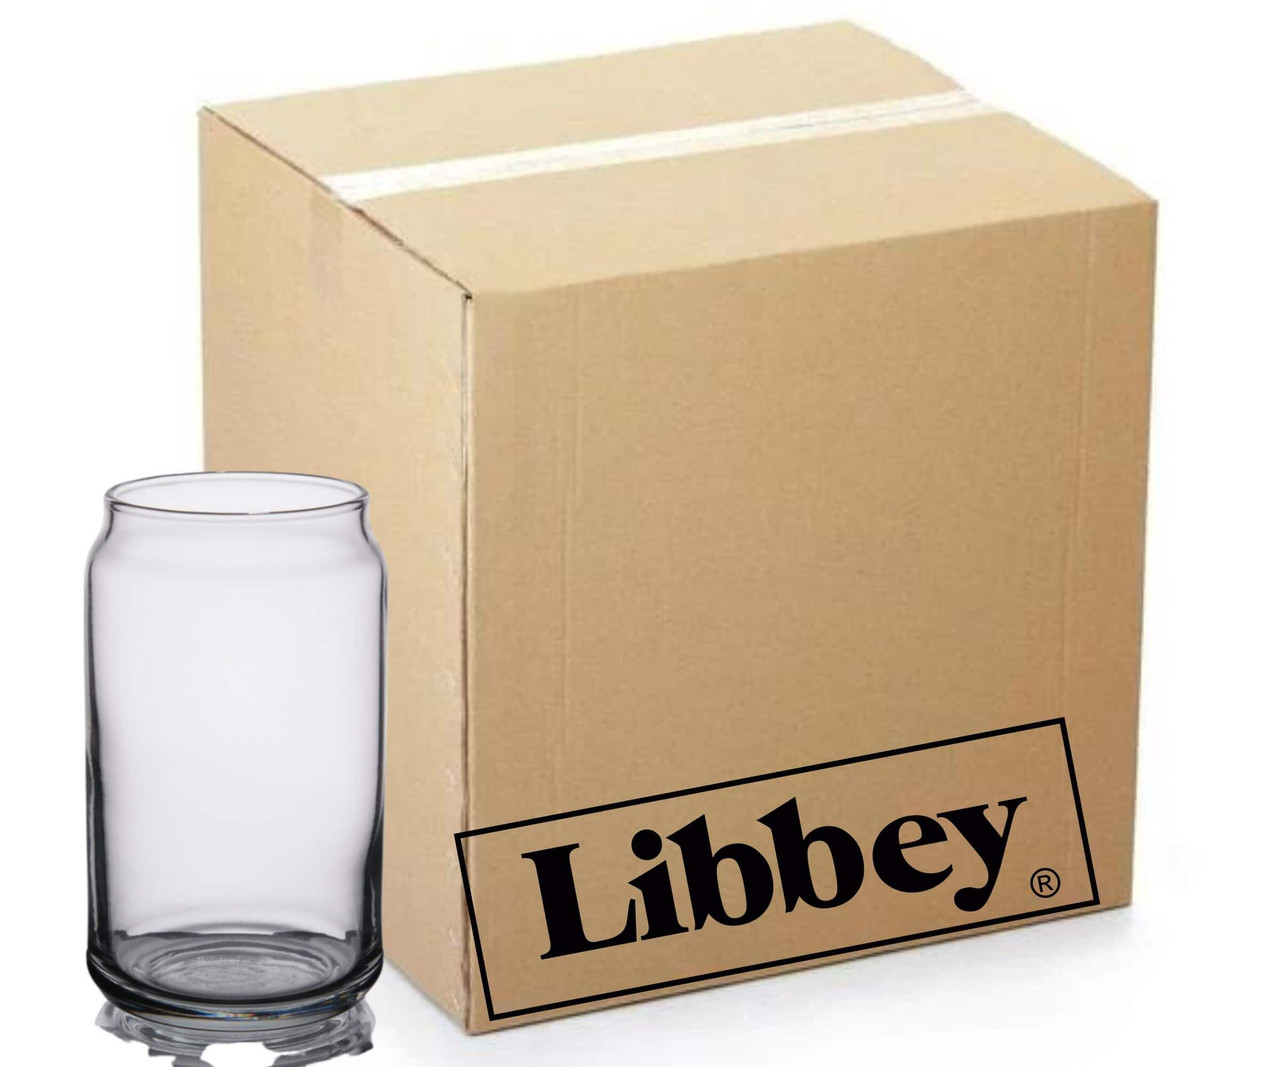 Libbey 24-Case for Unique Beverage Experiences - 5 oz. Glass Can Tasting Glass-Chicken Pieces